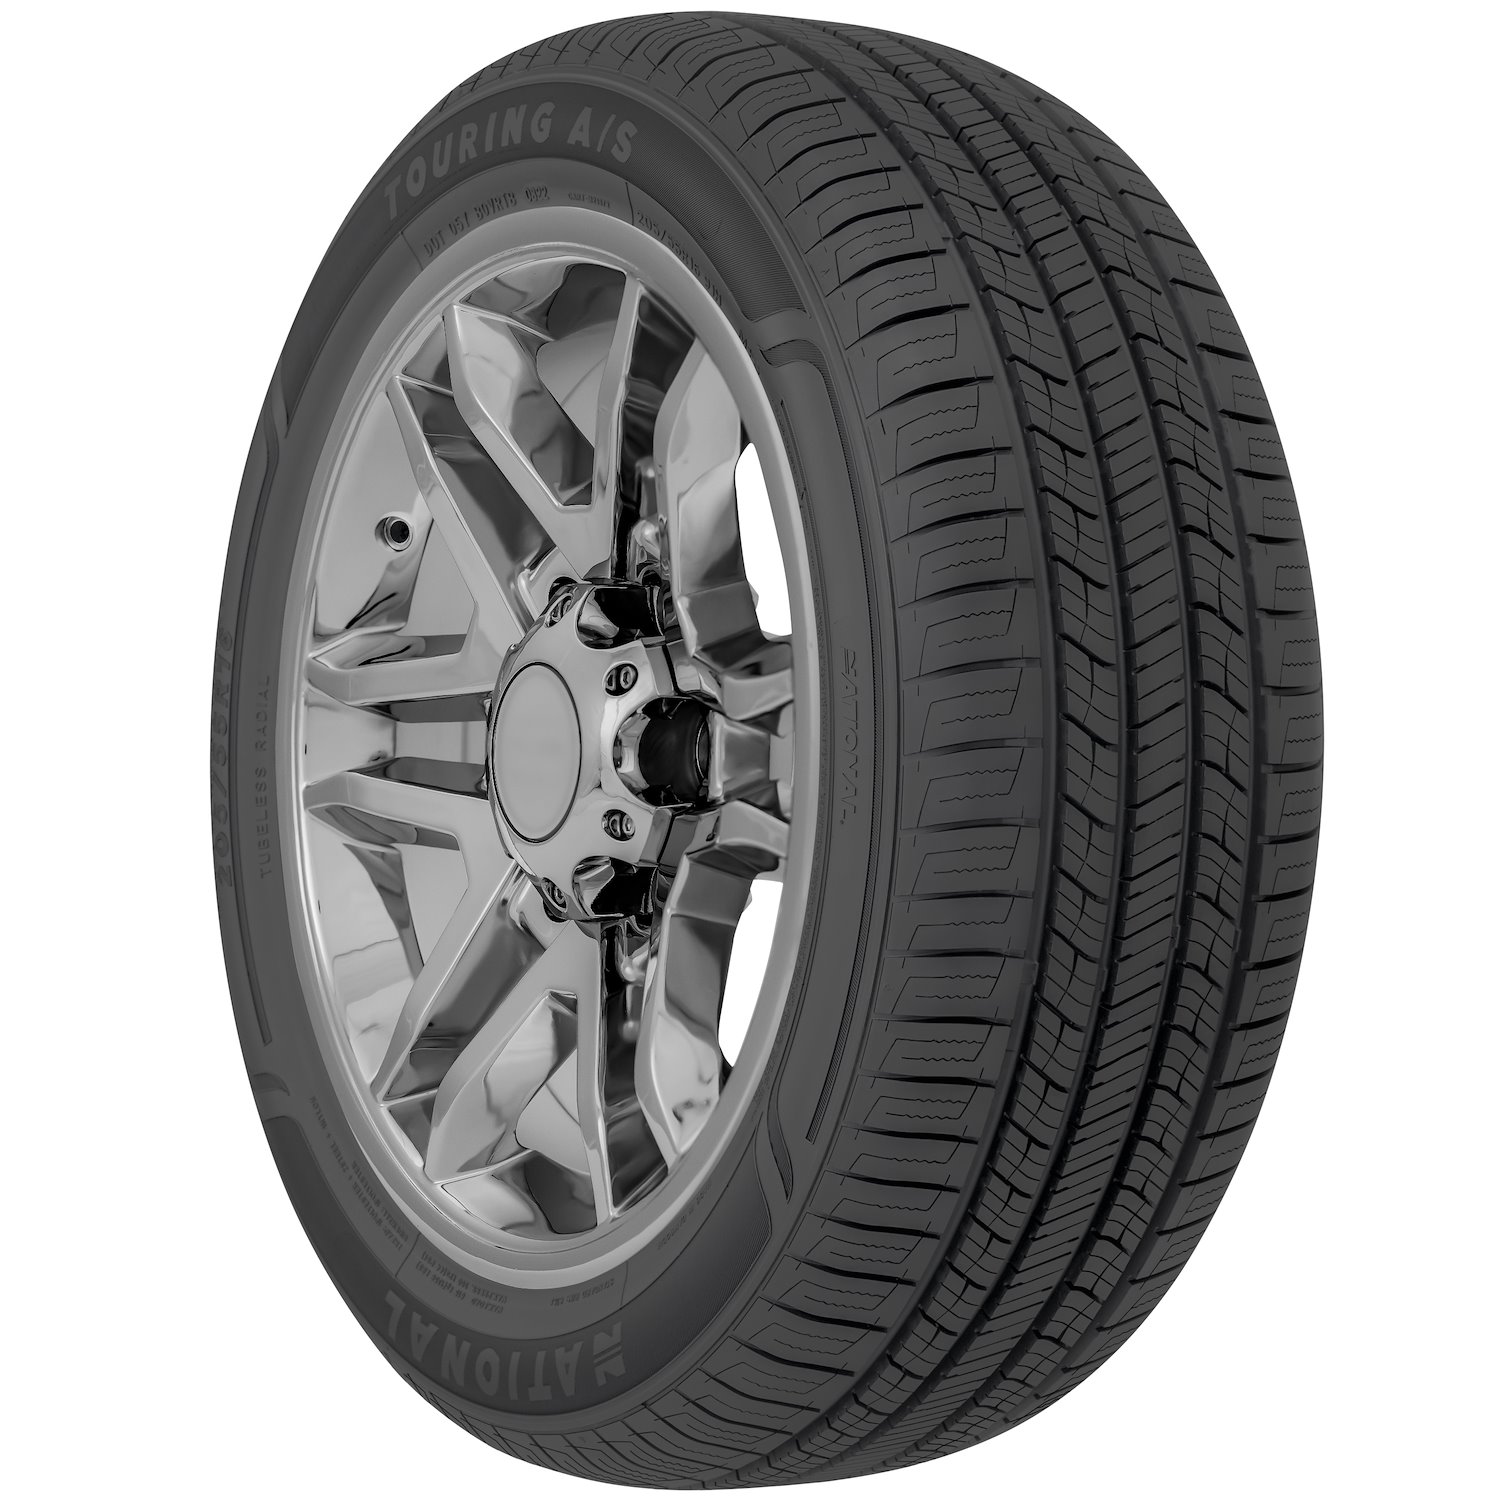 NLR08 Touring A/S Tire, 215/55R17